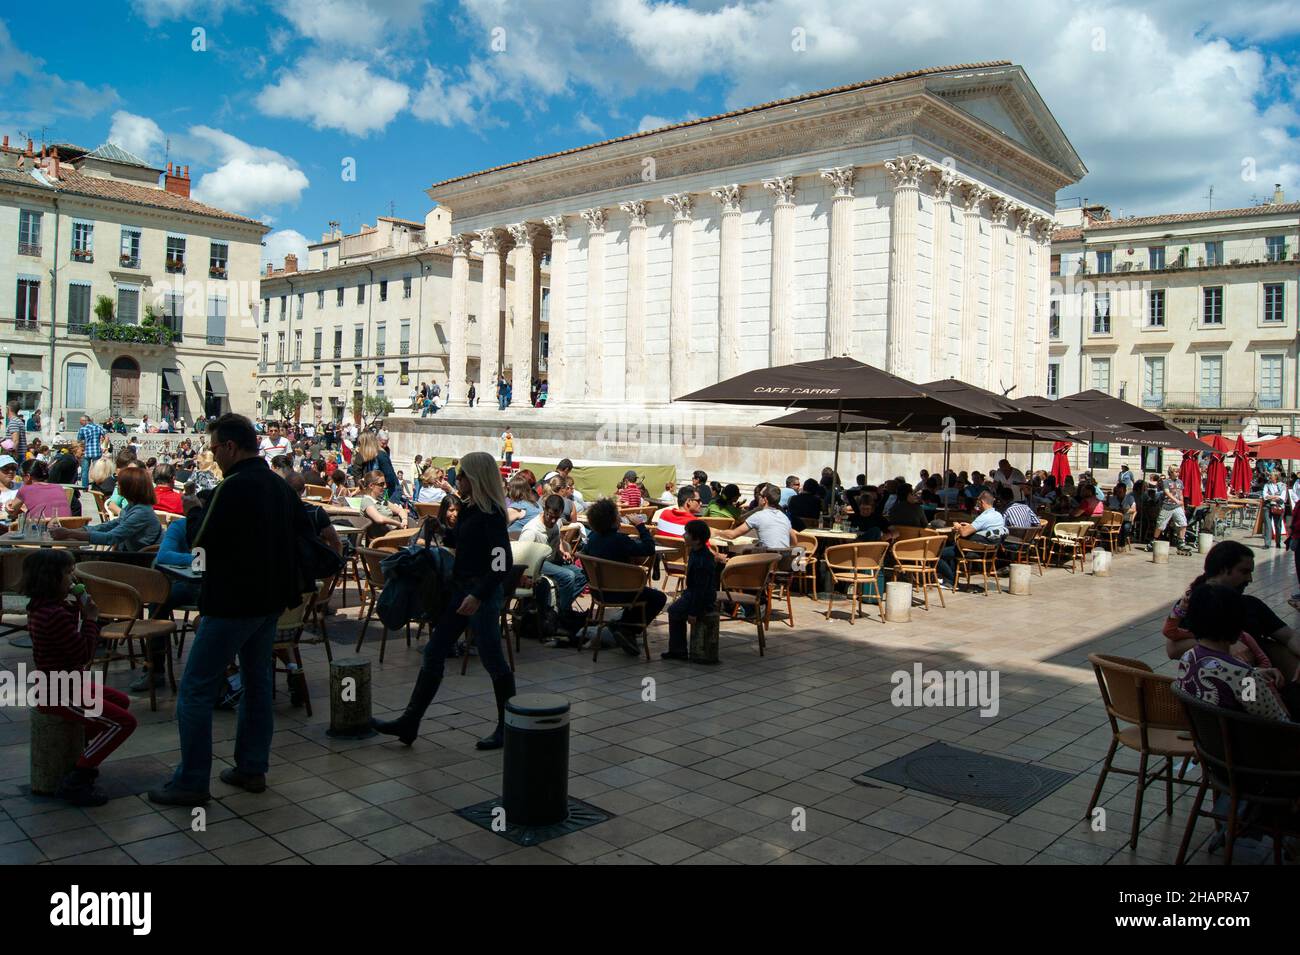 Nimes - France - April 24 2011 : Beautiful historic Maison Carree, a classical Roman temple. Holidaymakers enjoy a spring day at pavement cafes. Lands Stock Photo